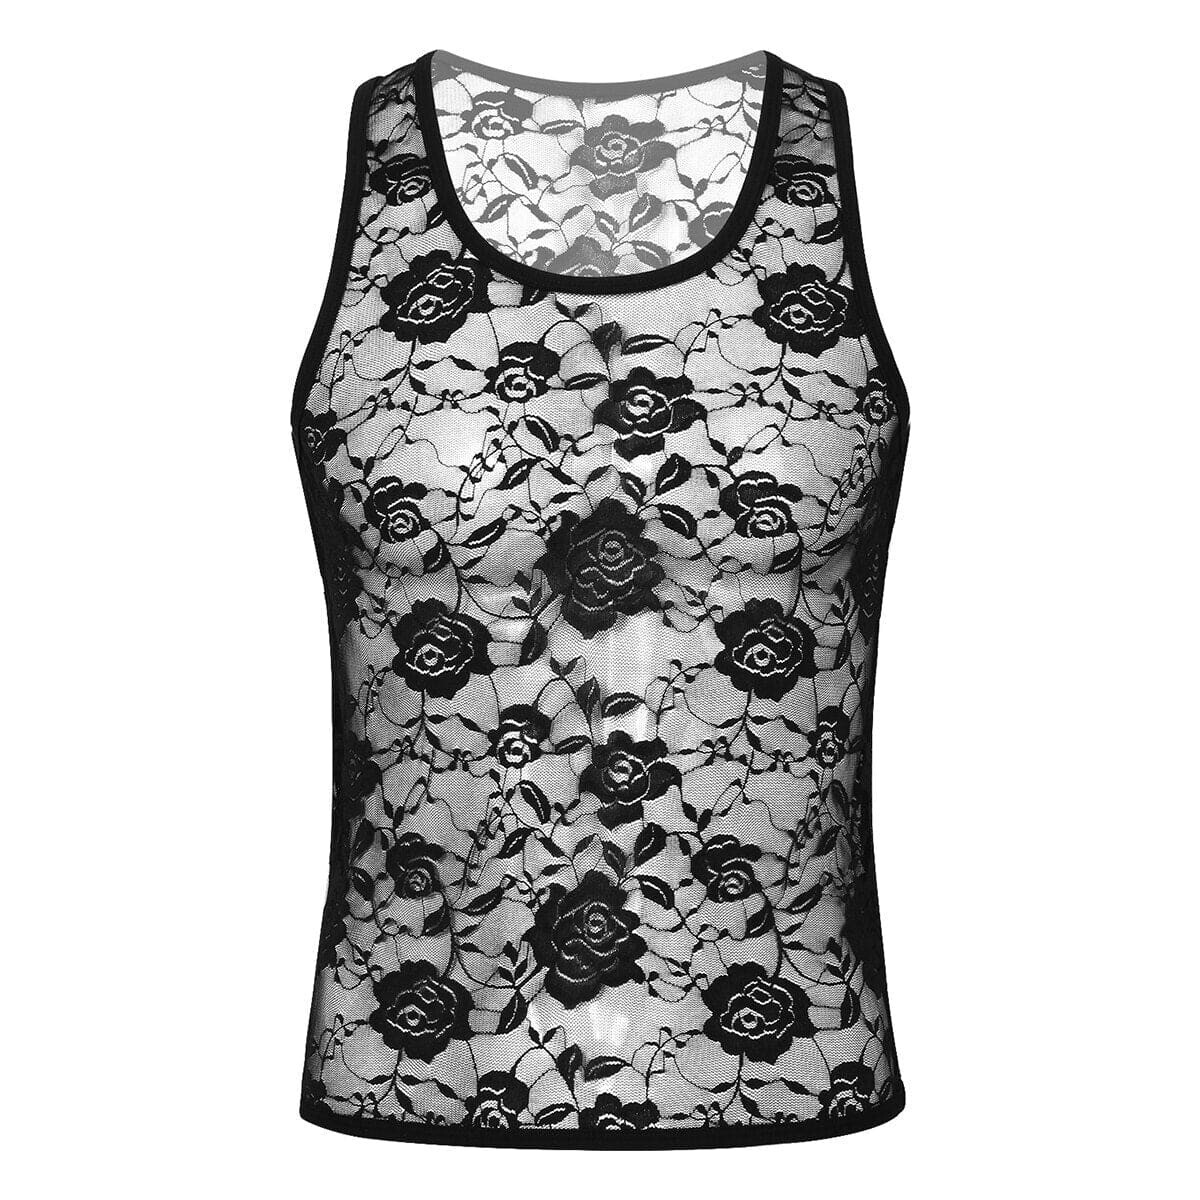 Men's Sheer Mesh Floral Lace Undershirt Muscle Rave T-Shirts Tank Top